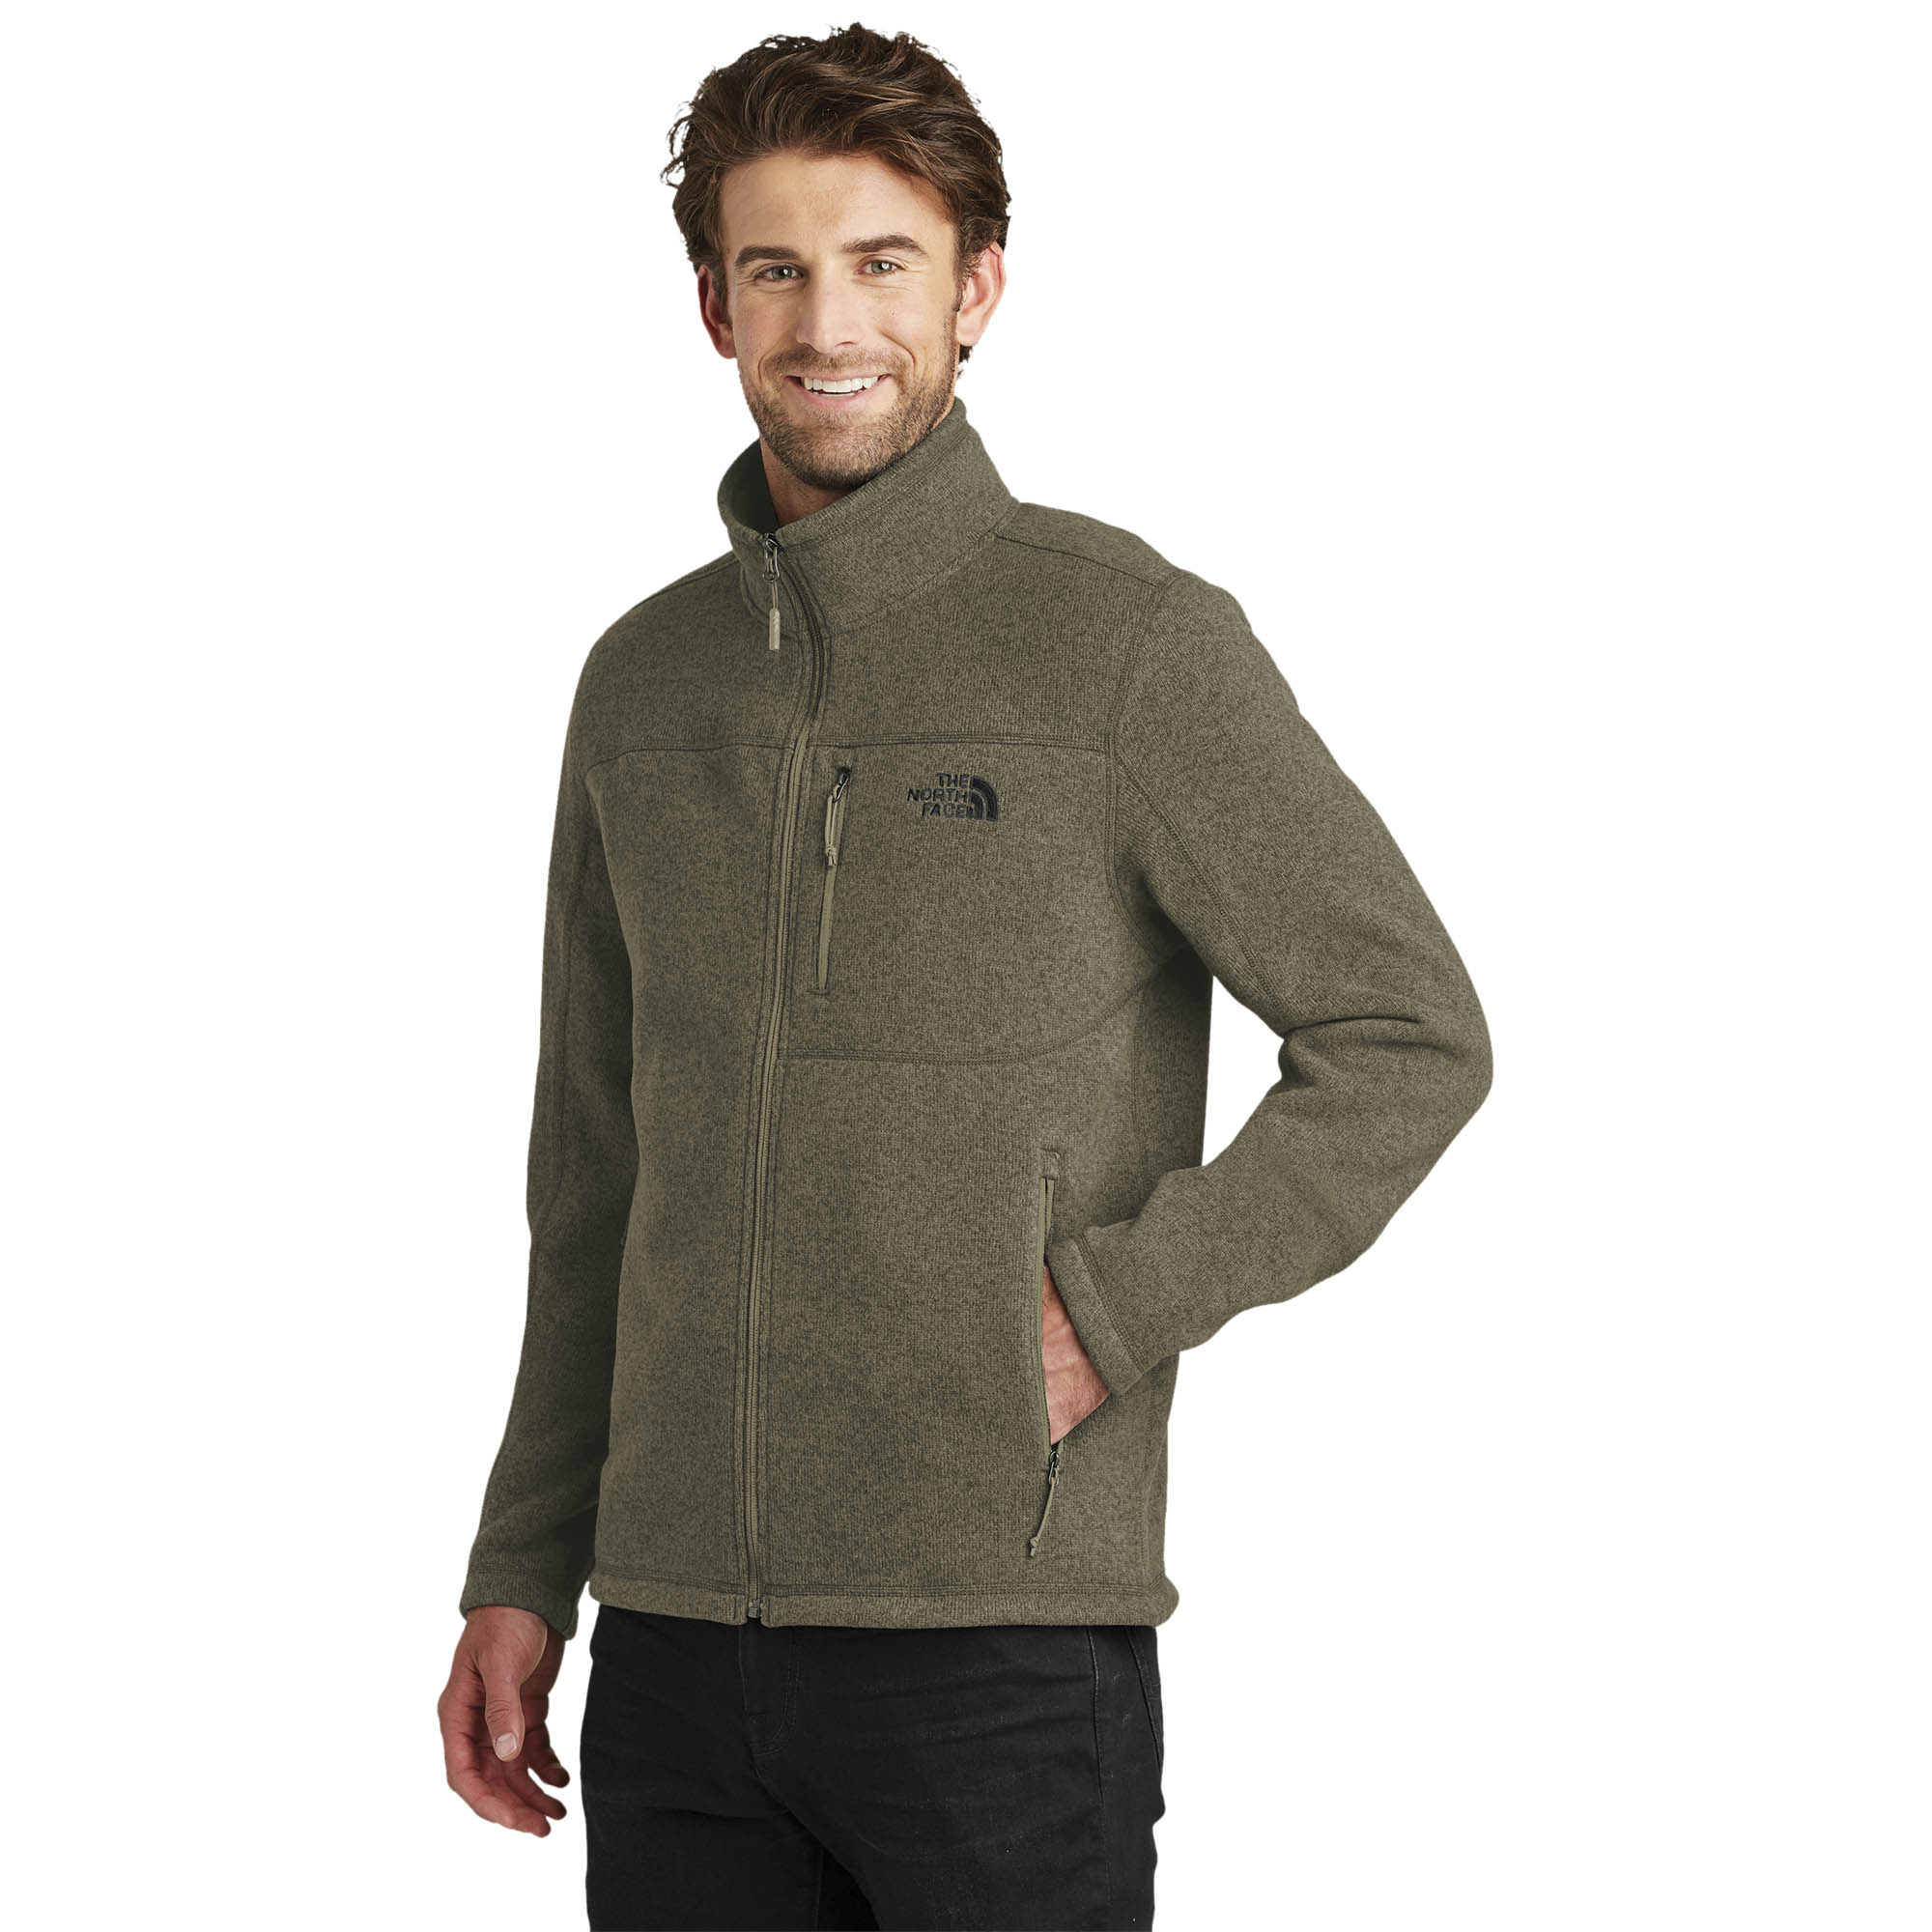 The North Face NF0A3LH7 Sweater Fleece Jacket - New Taupe Green Heather ...